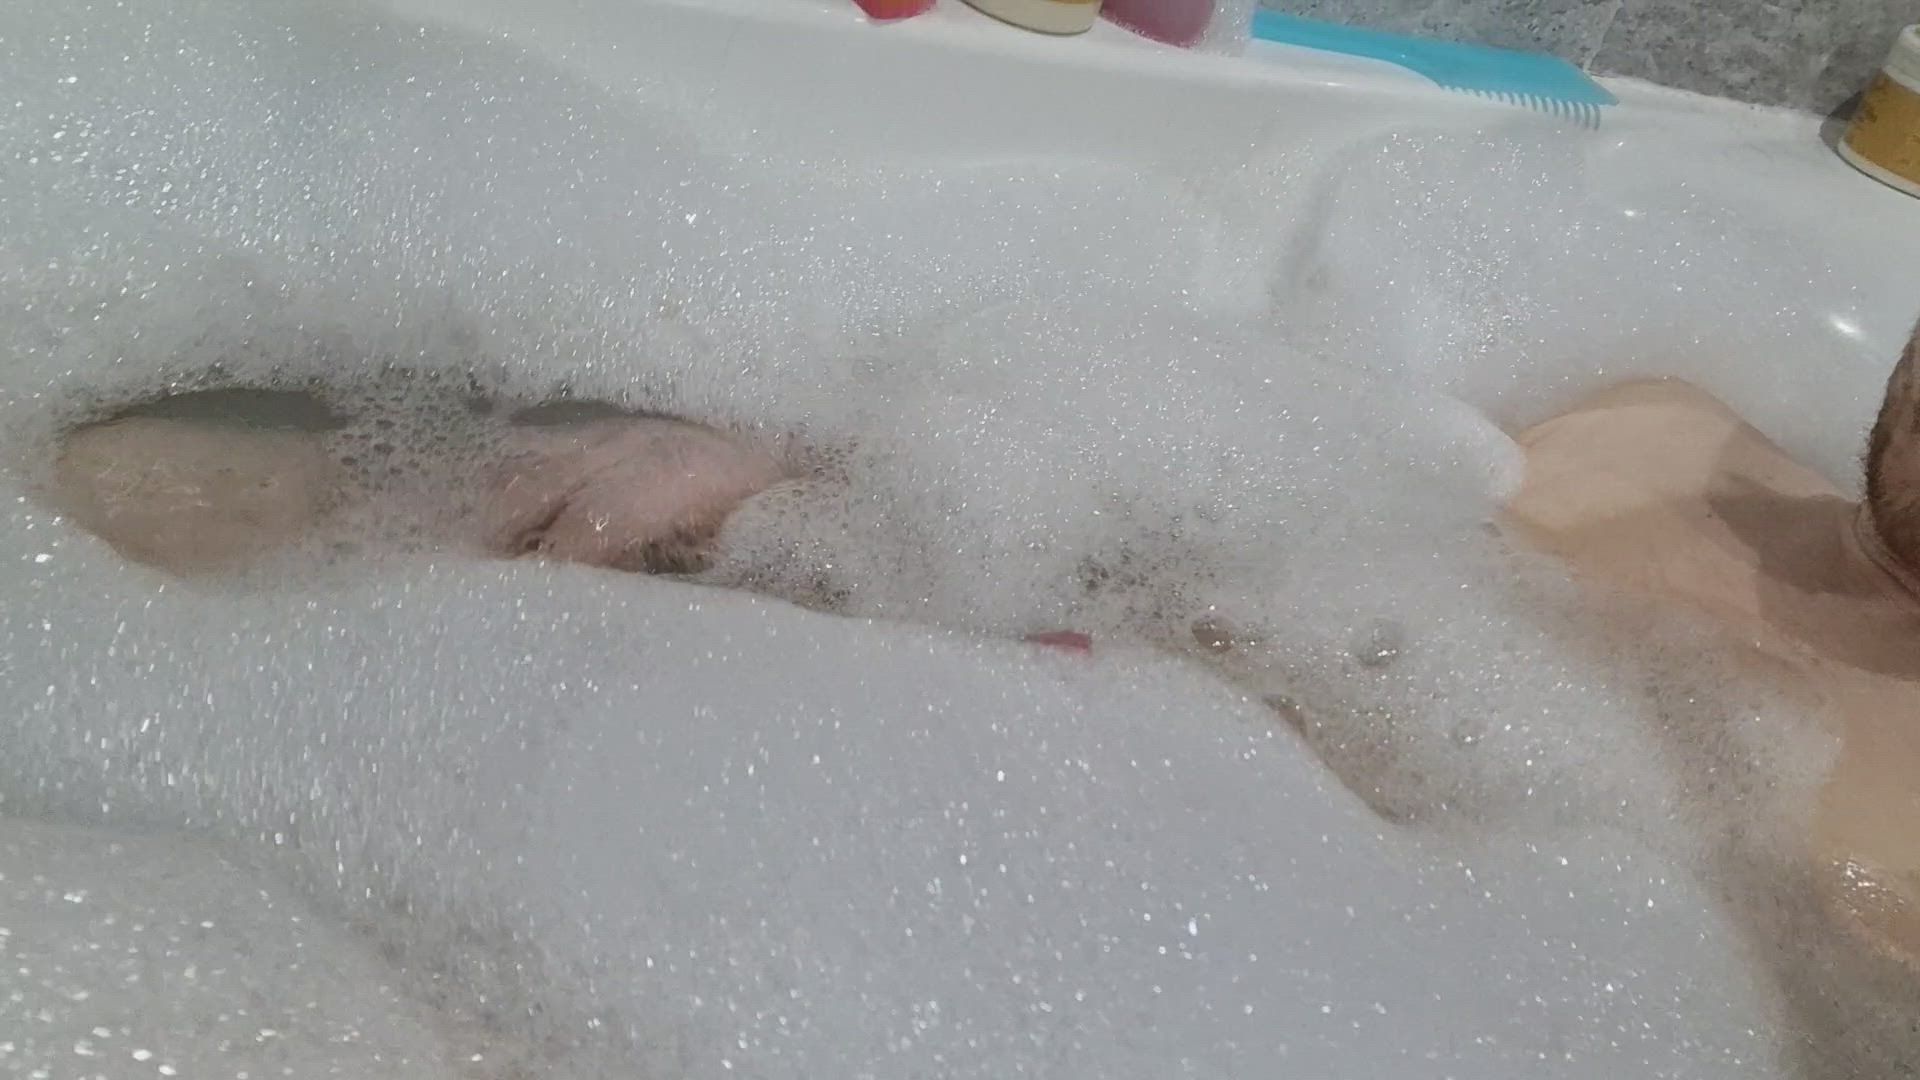 Bathtub porn video with onlyfans model gimmesum84 <strong>@bigdickmikey1</strong>